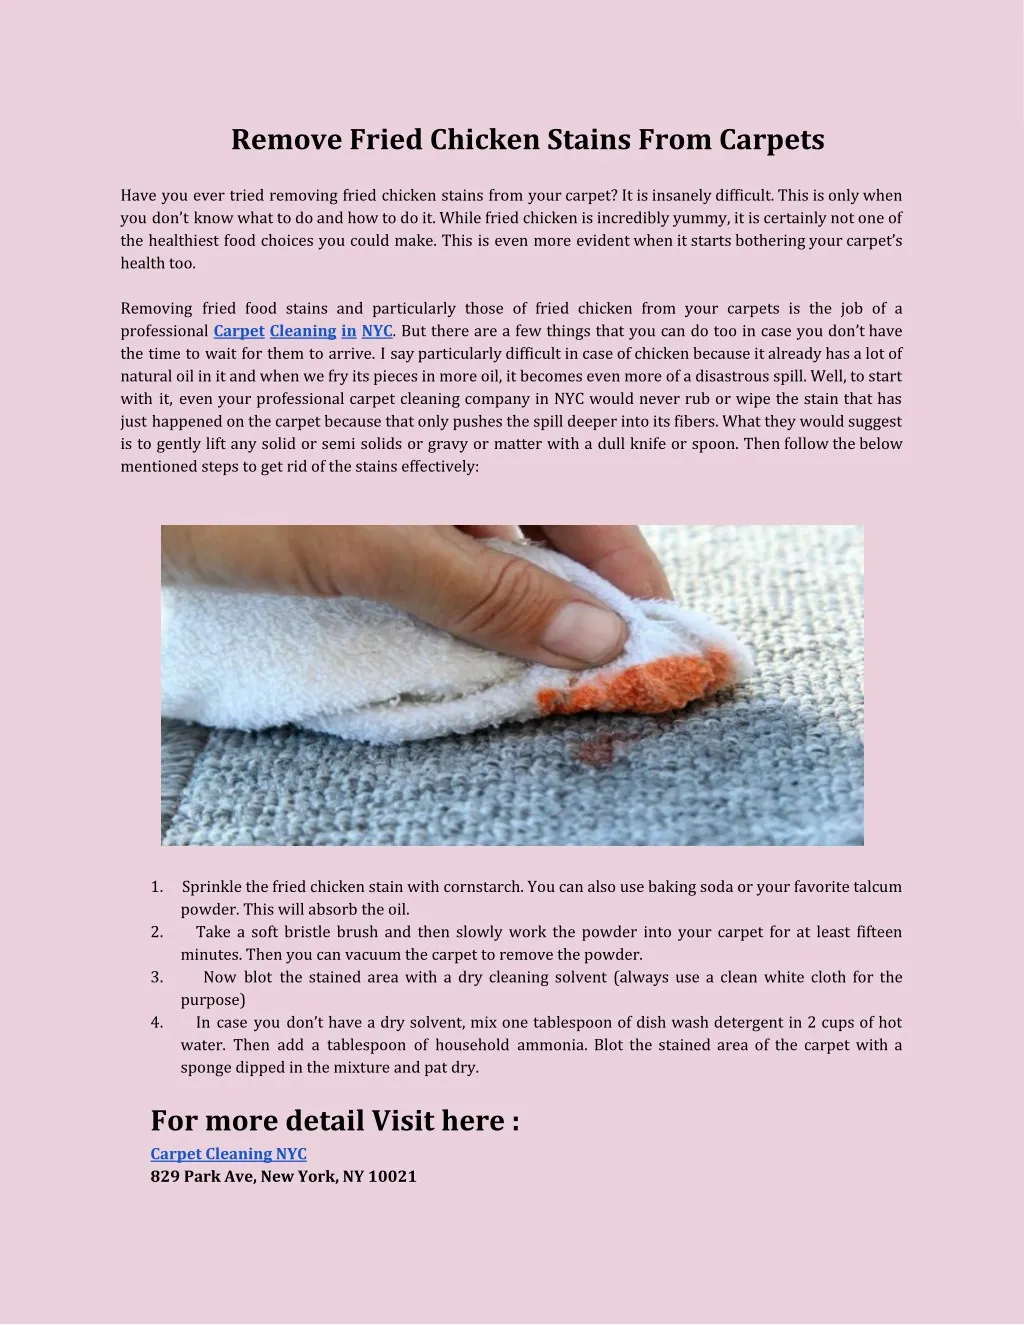 remove fried chicken stains from carpets